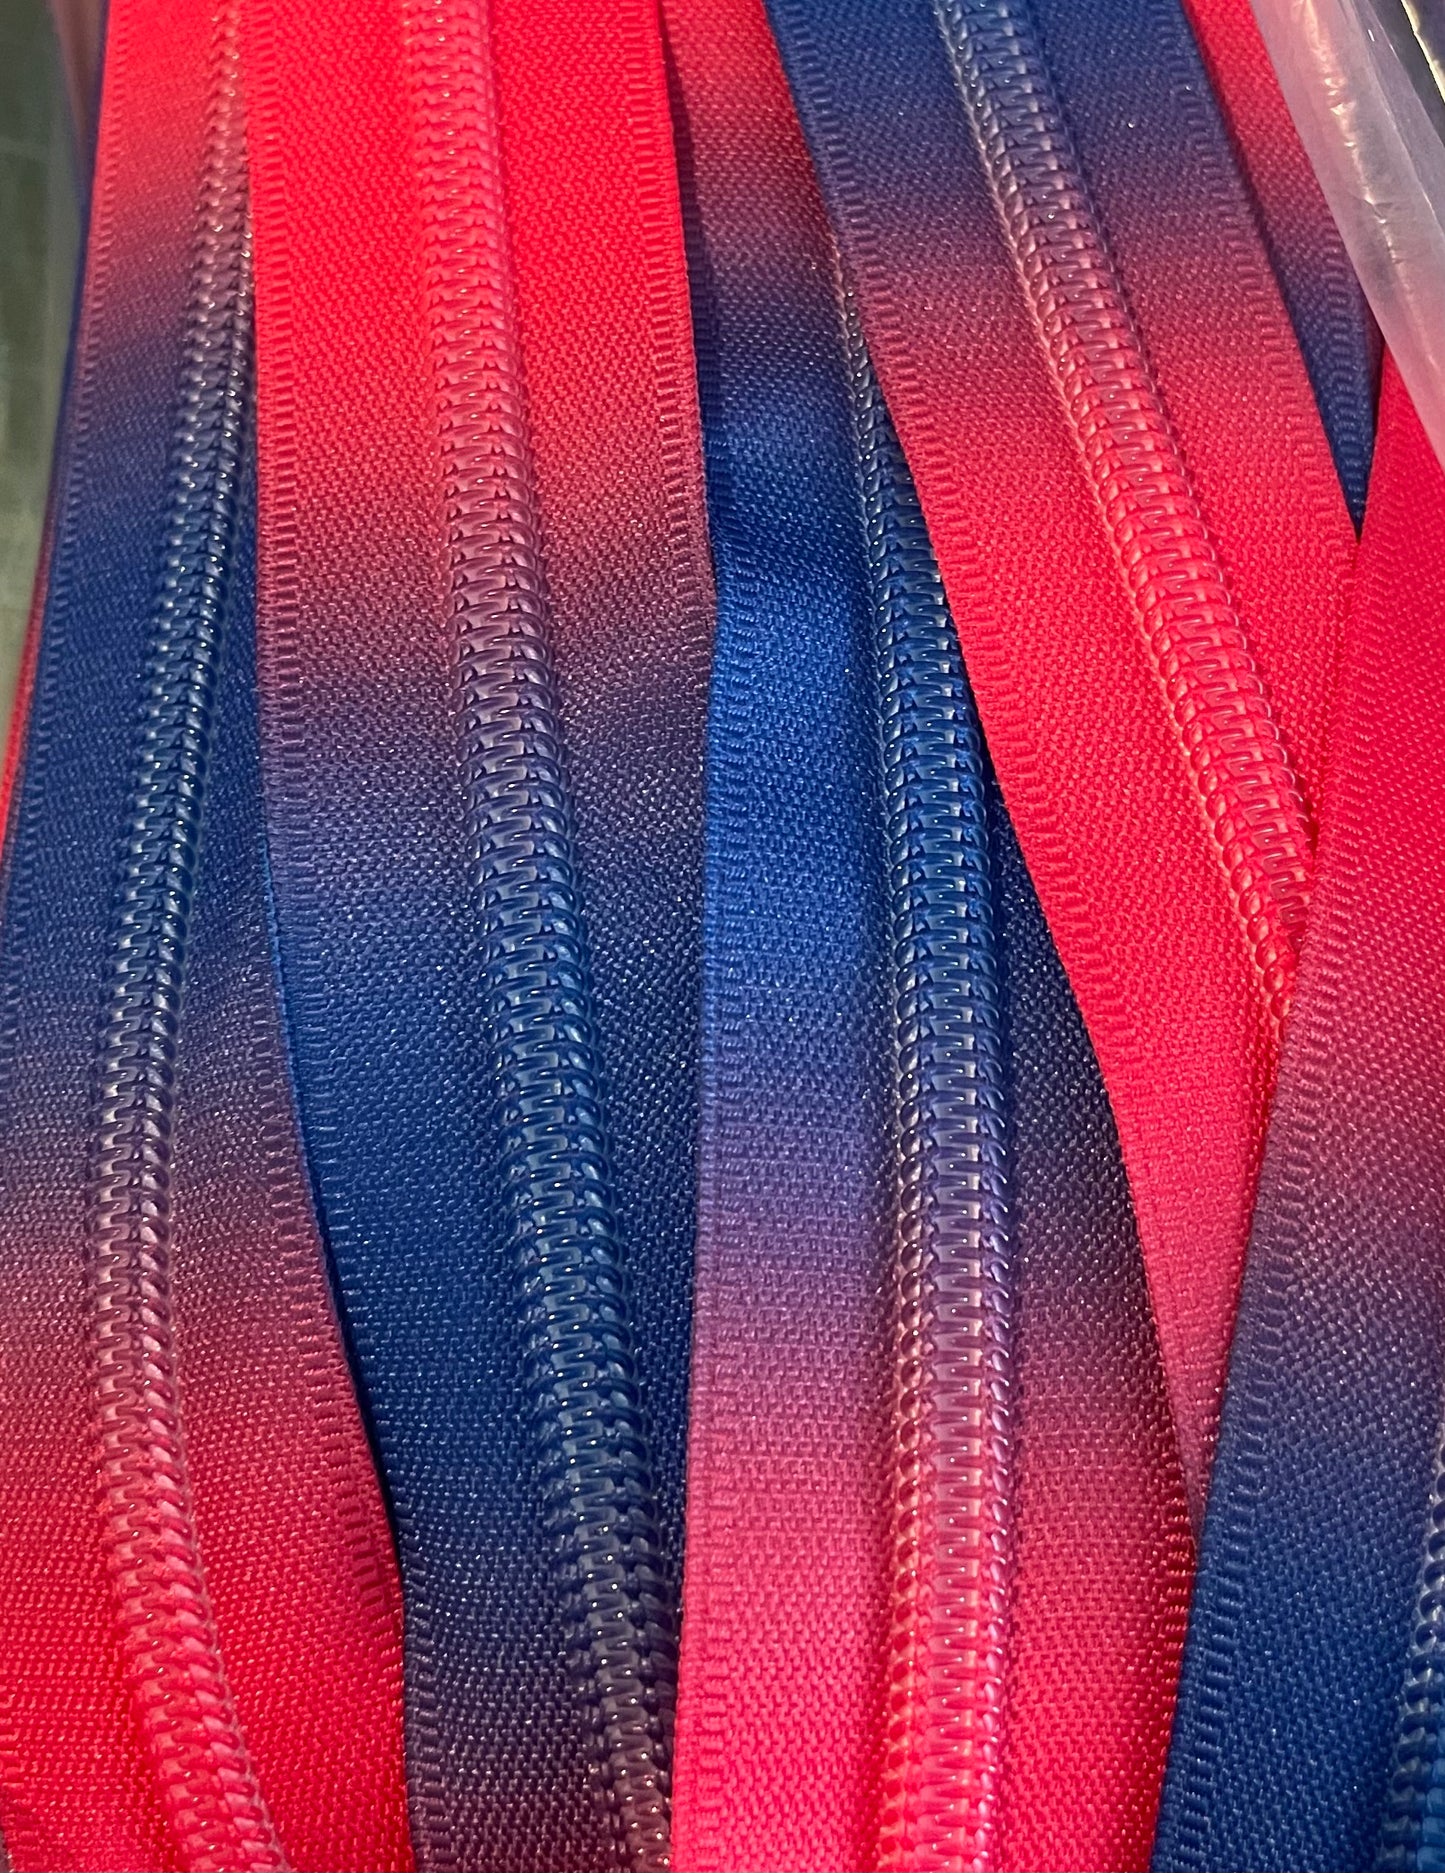 Hot pink and Royal Ombré zipper tape